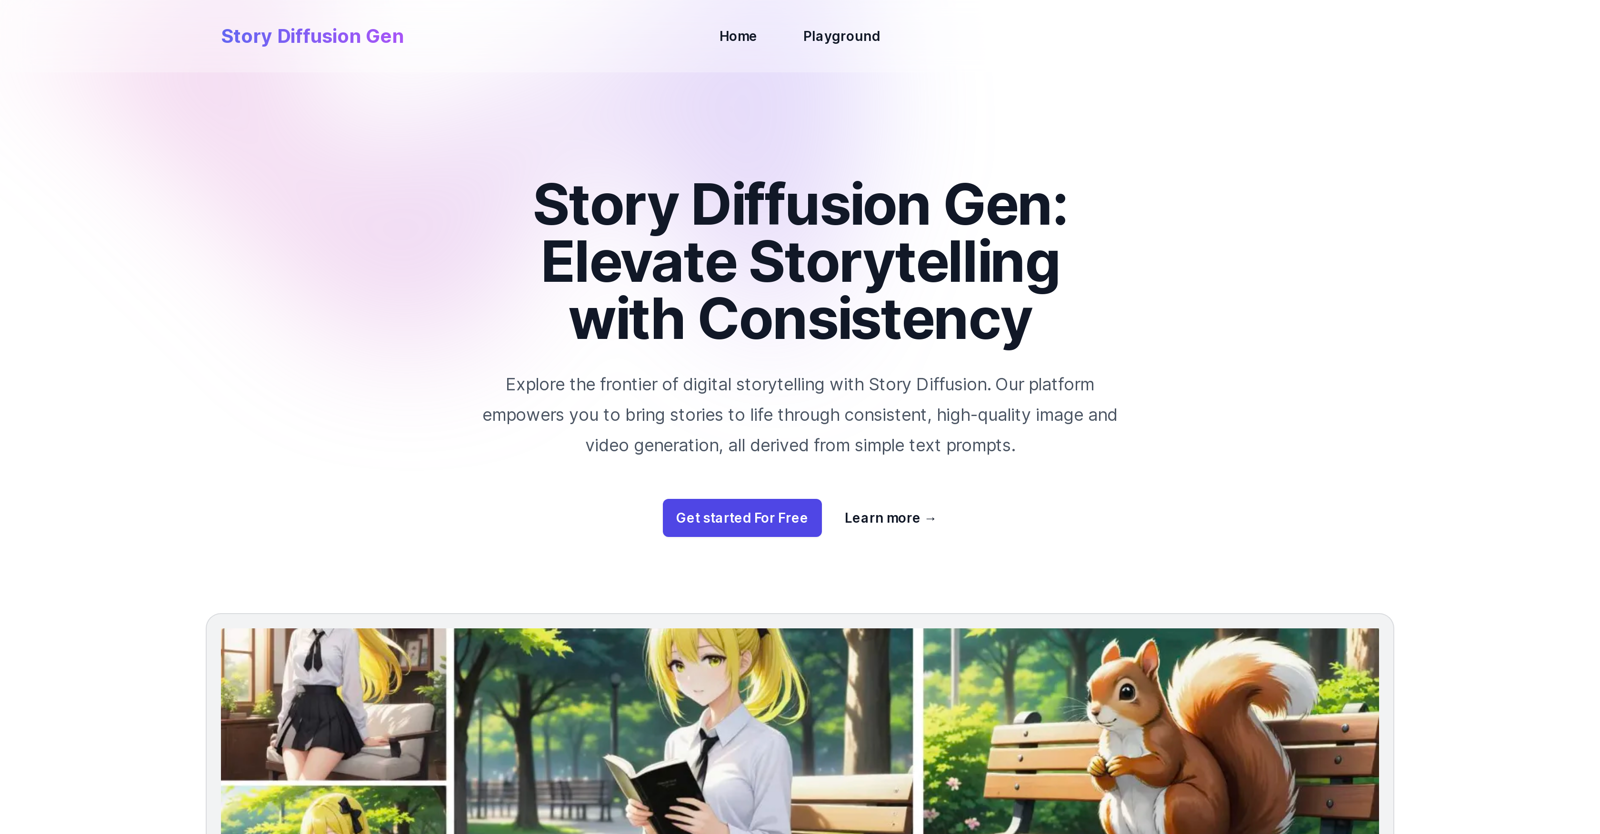 Story Diffusion Gen website